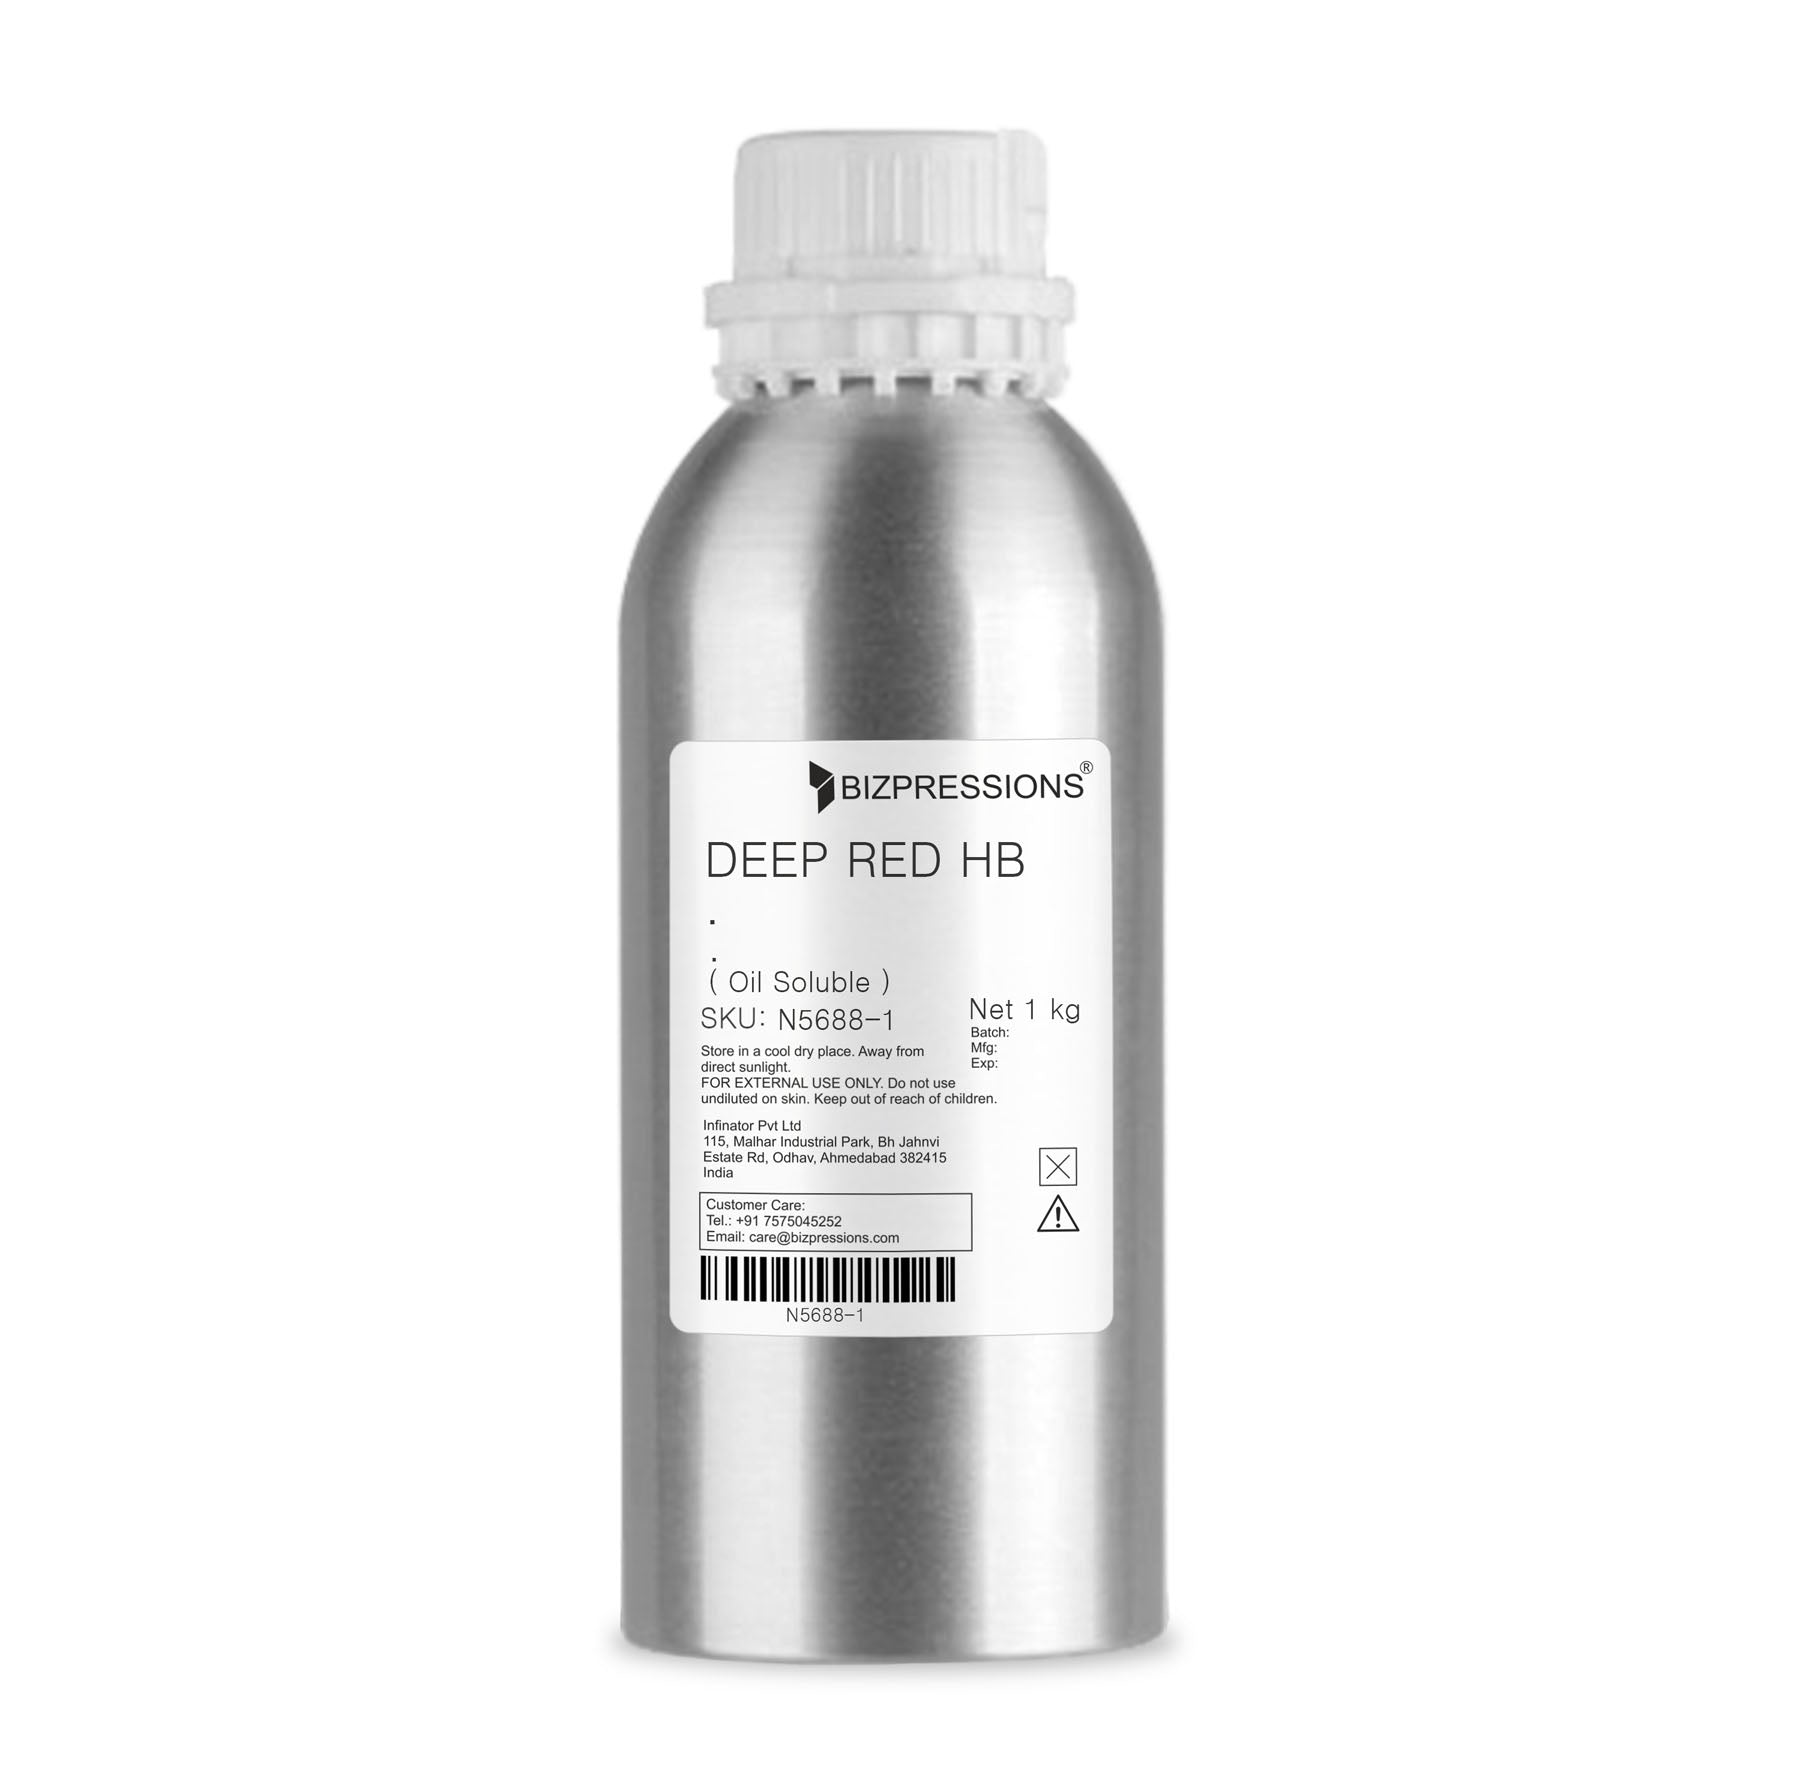 DEEP RED HB - Fragrance ( Oil Soluble )